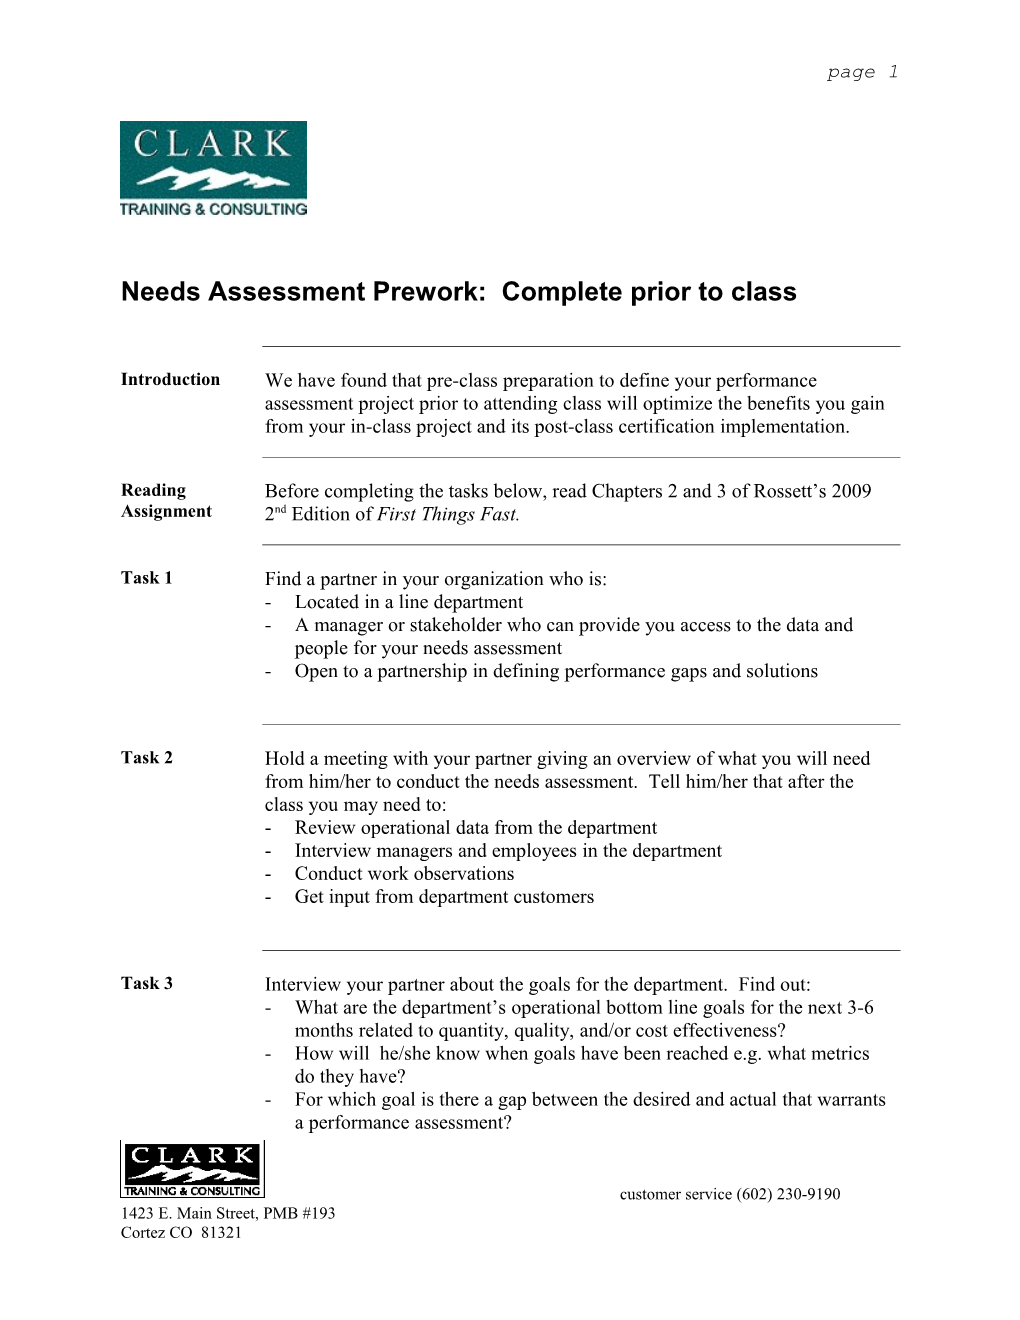 Needs Assessment Worksheet: Complete Prior to Class